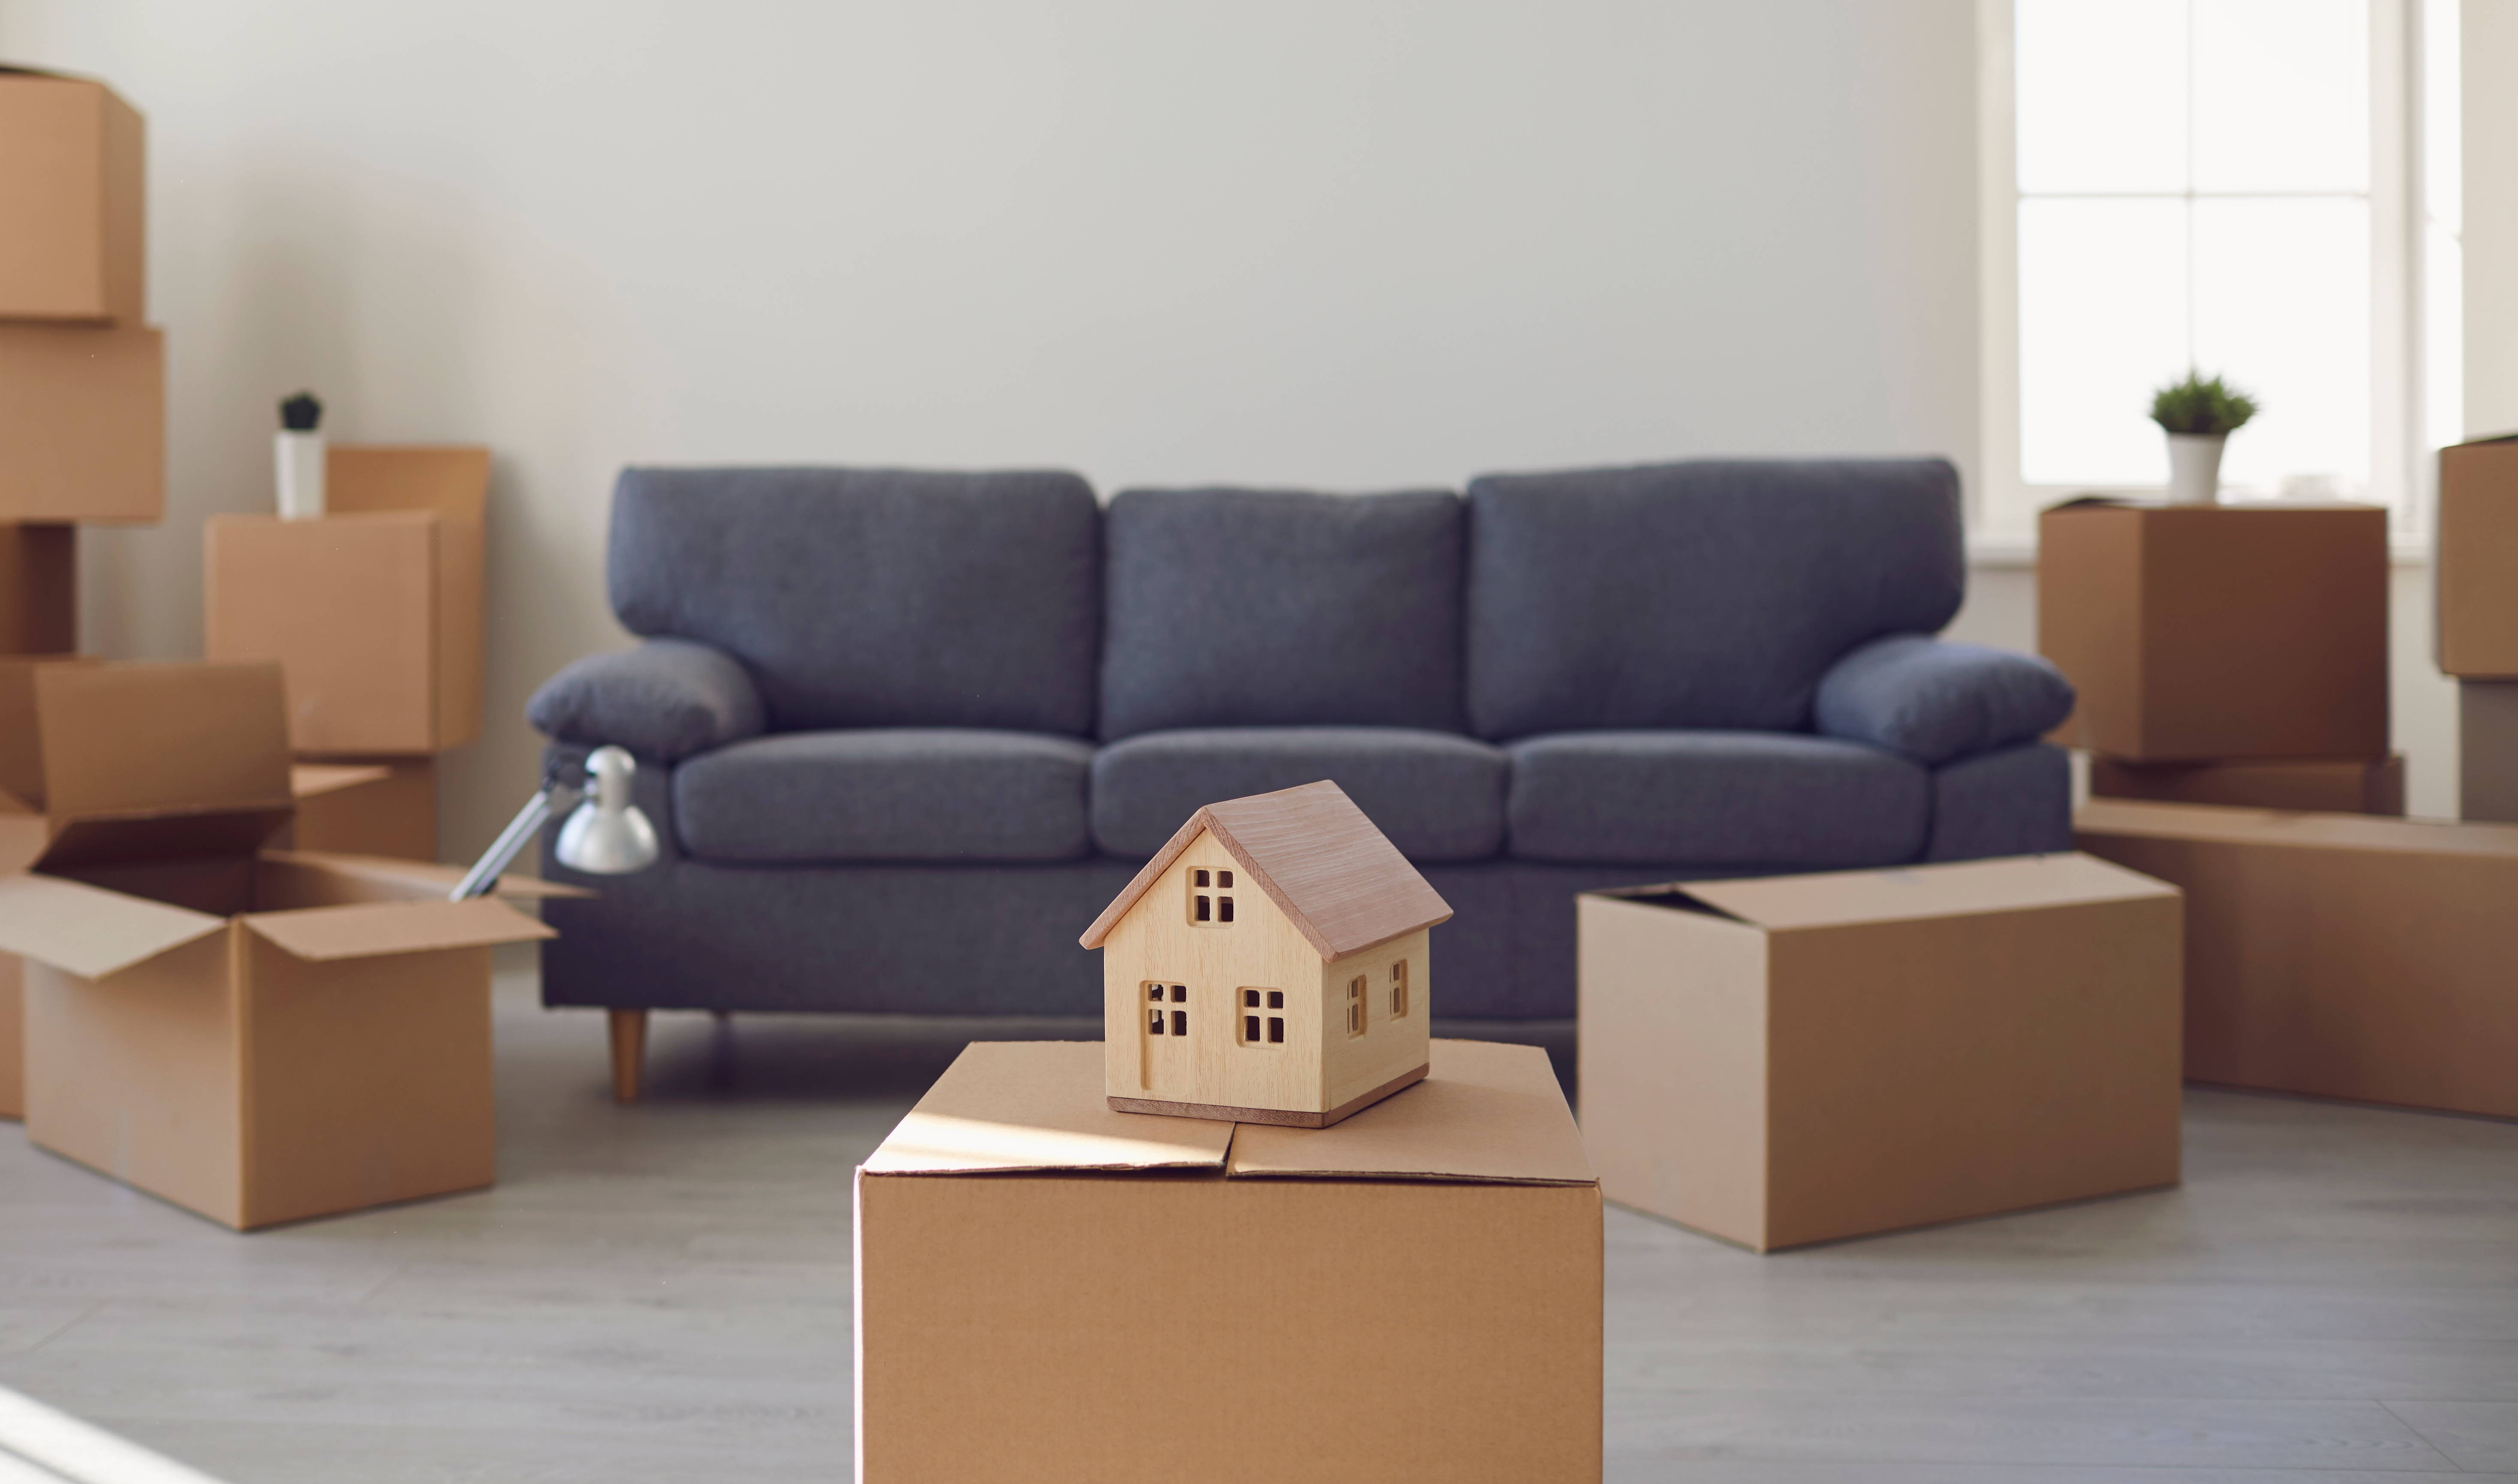 Is it best to rent furnished or unfurnished?